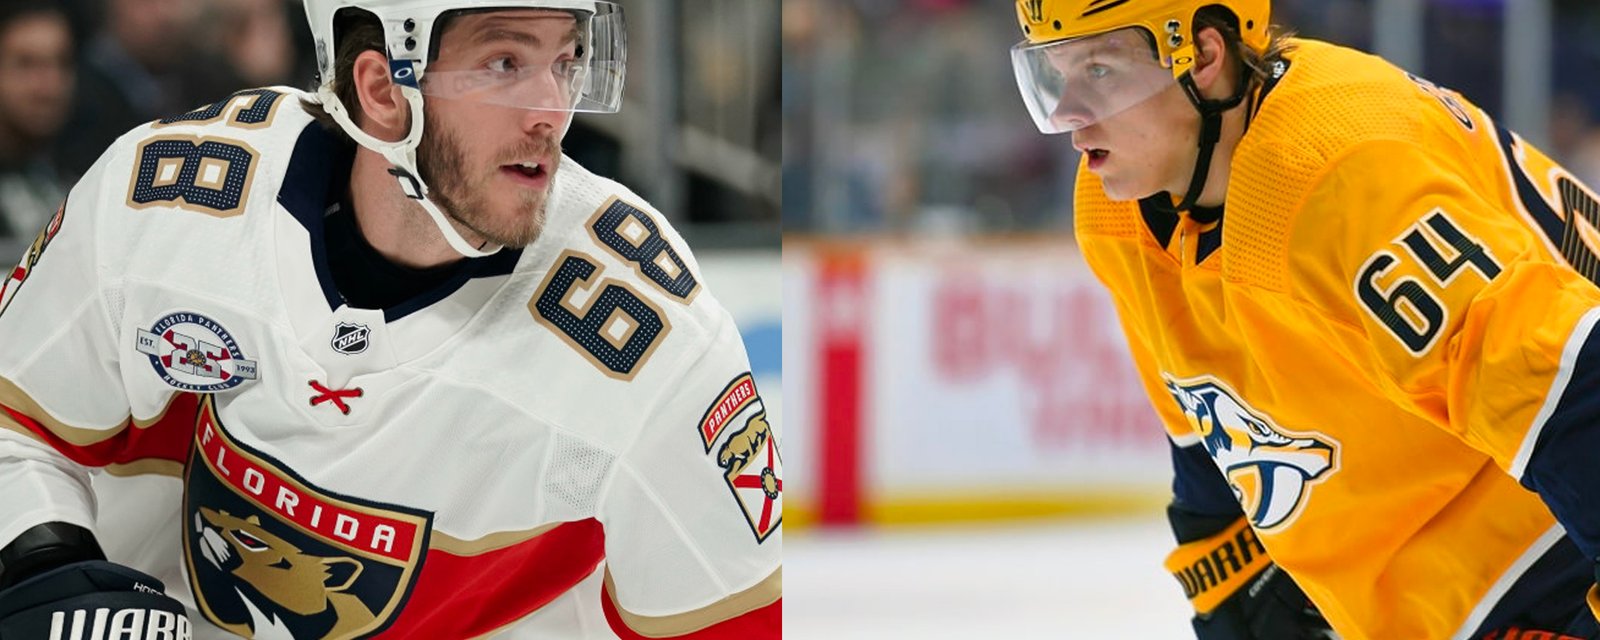 Finally some news on free agents Hoffman and Granlund! 